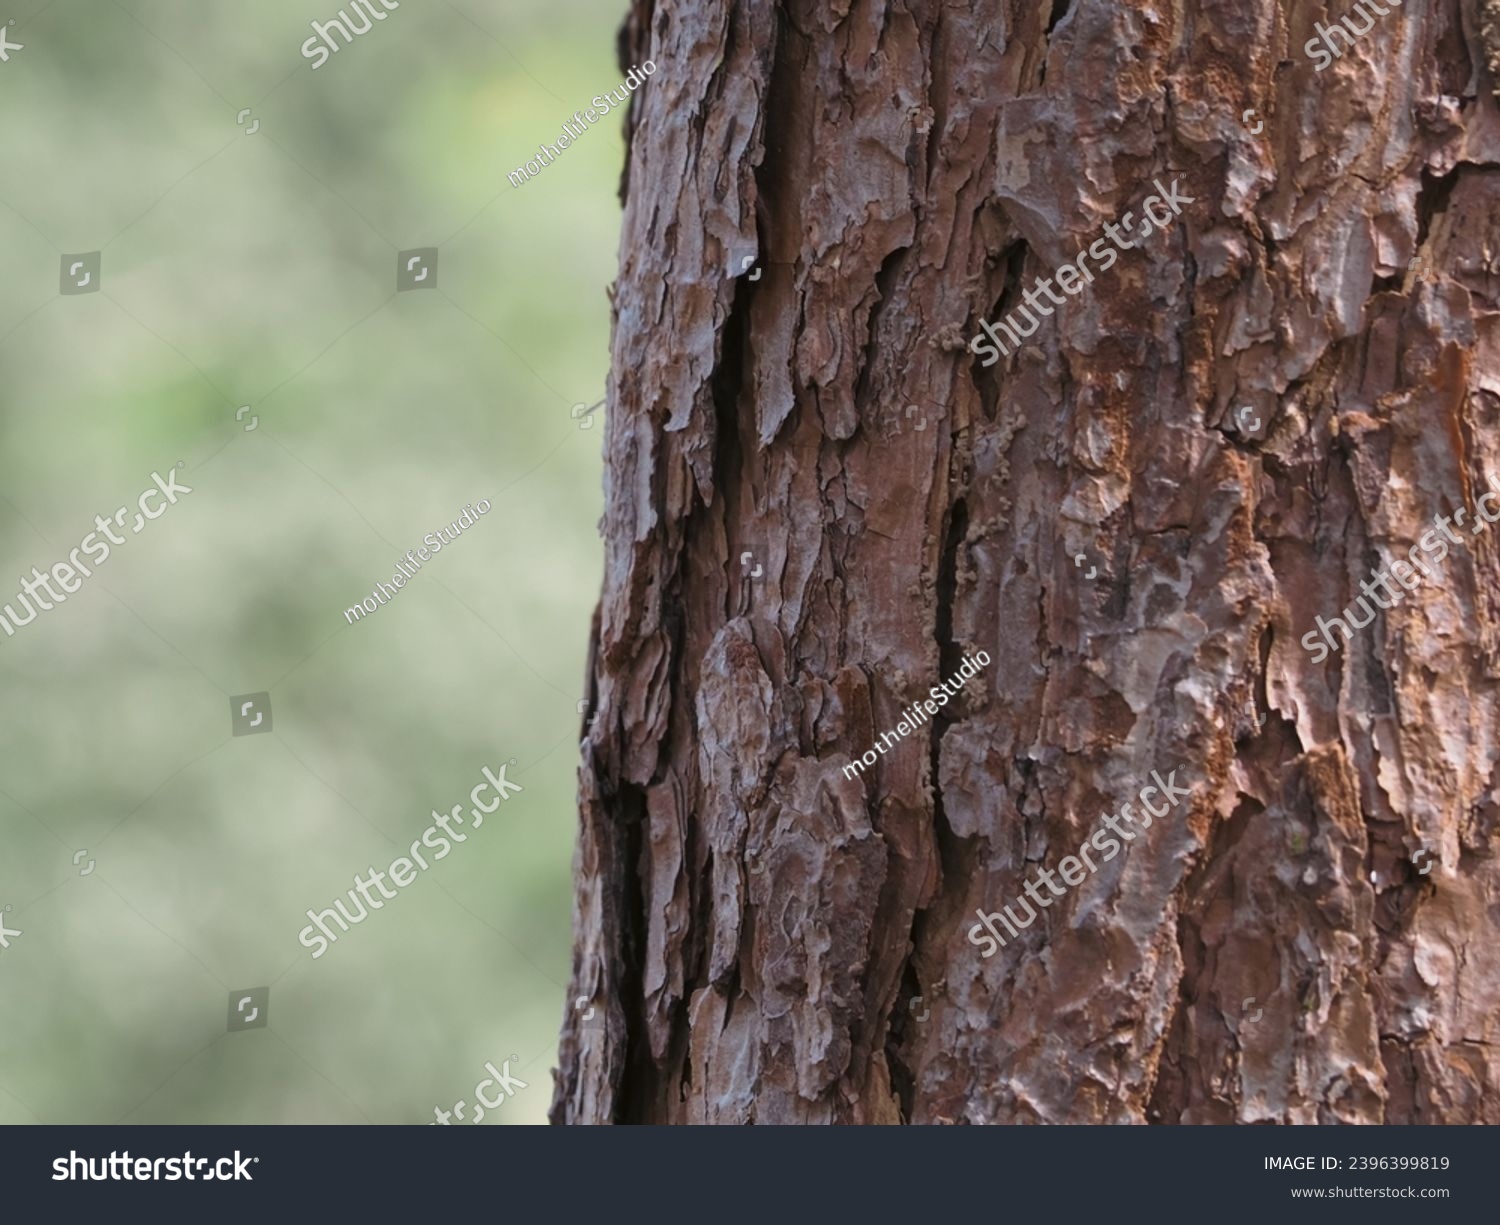 Close-up of pine tree texture in the forest for a natural background. #2396399819